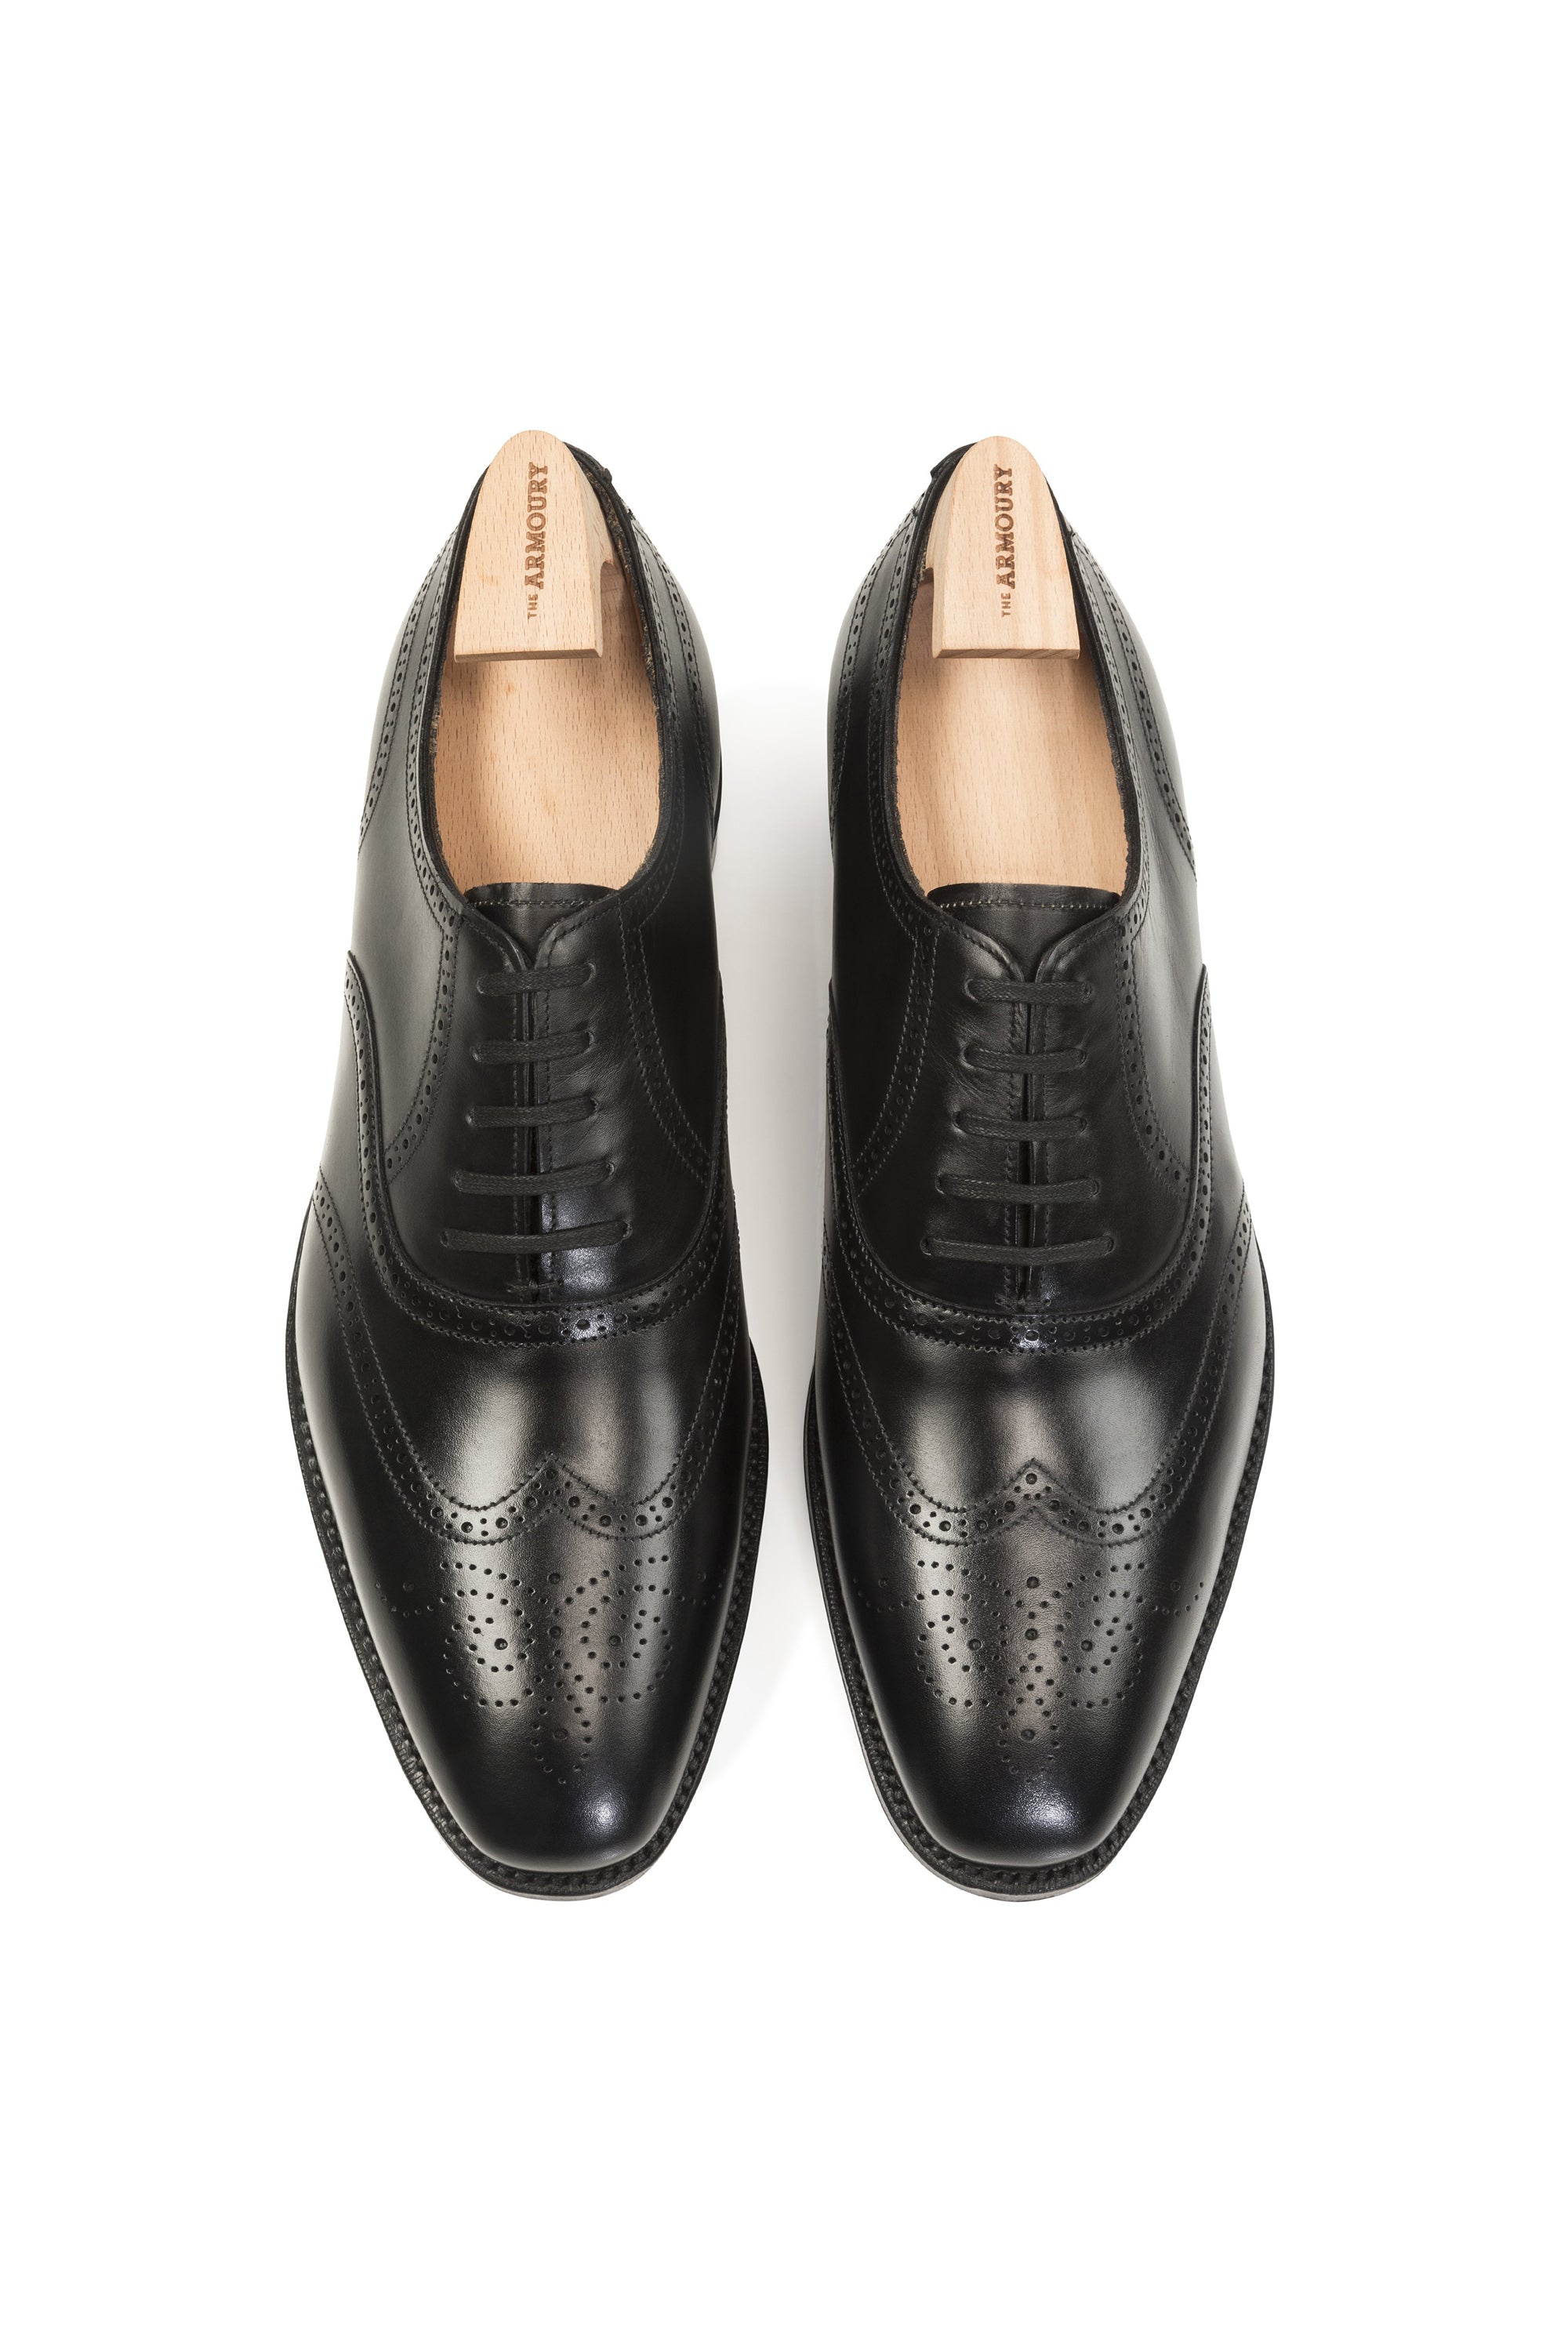 The Armoury Hajime 100355 Gloucester Black Calf Oxford Shoes *factory seconds*